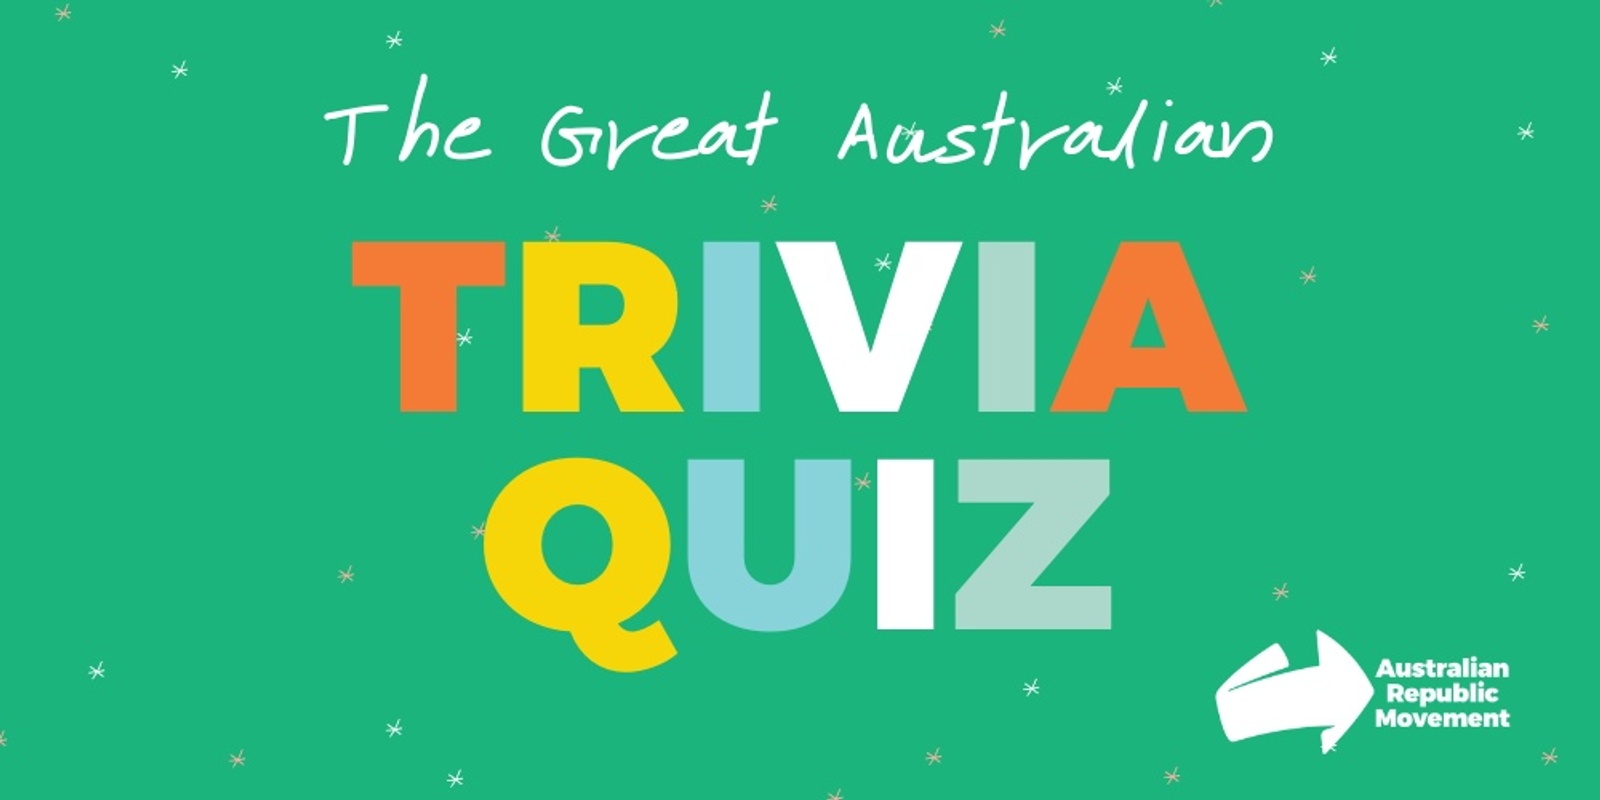 Banner image for The Great Australian Trivia Quiz with the Australian Republic Movement